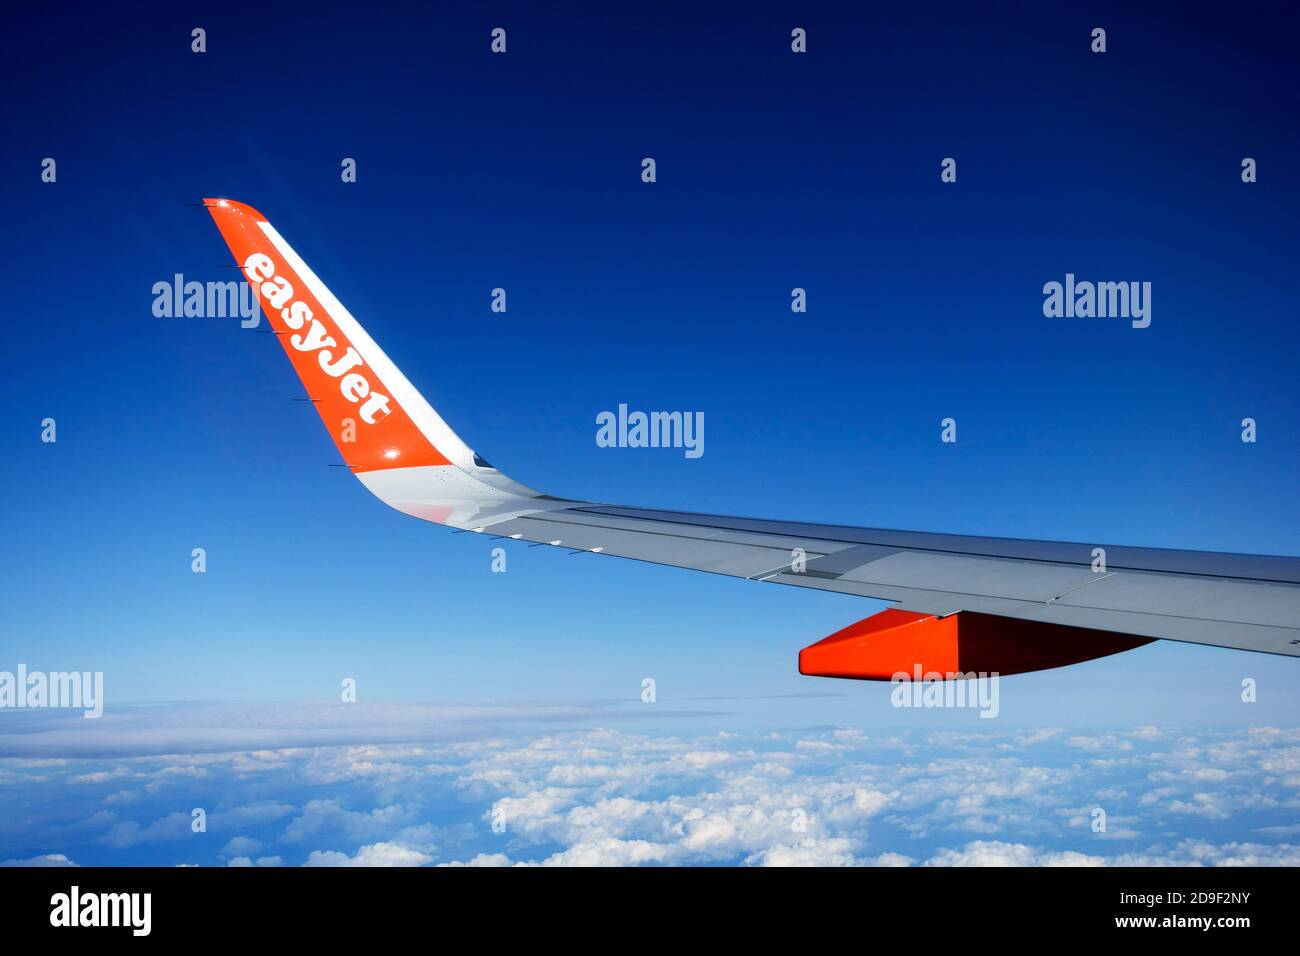 easyJet logo, on the wing of an aeroplane in flight, against a strong blue sky Stock Photo